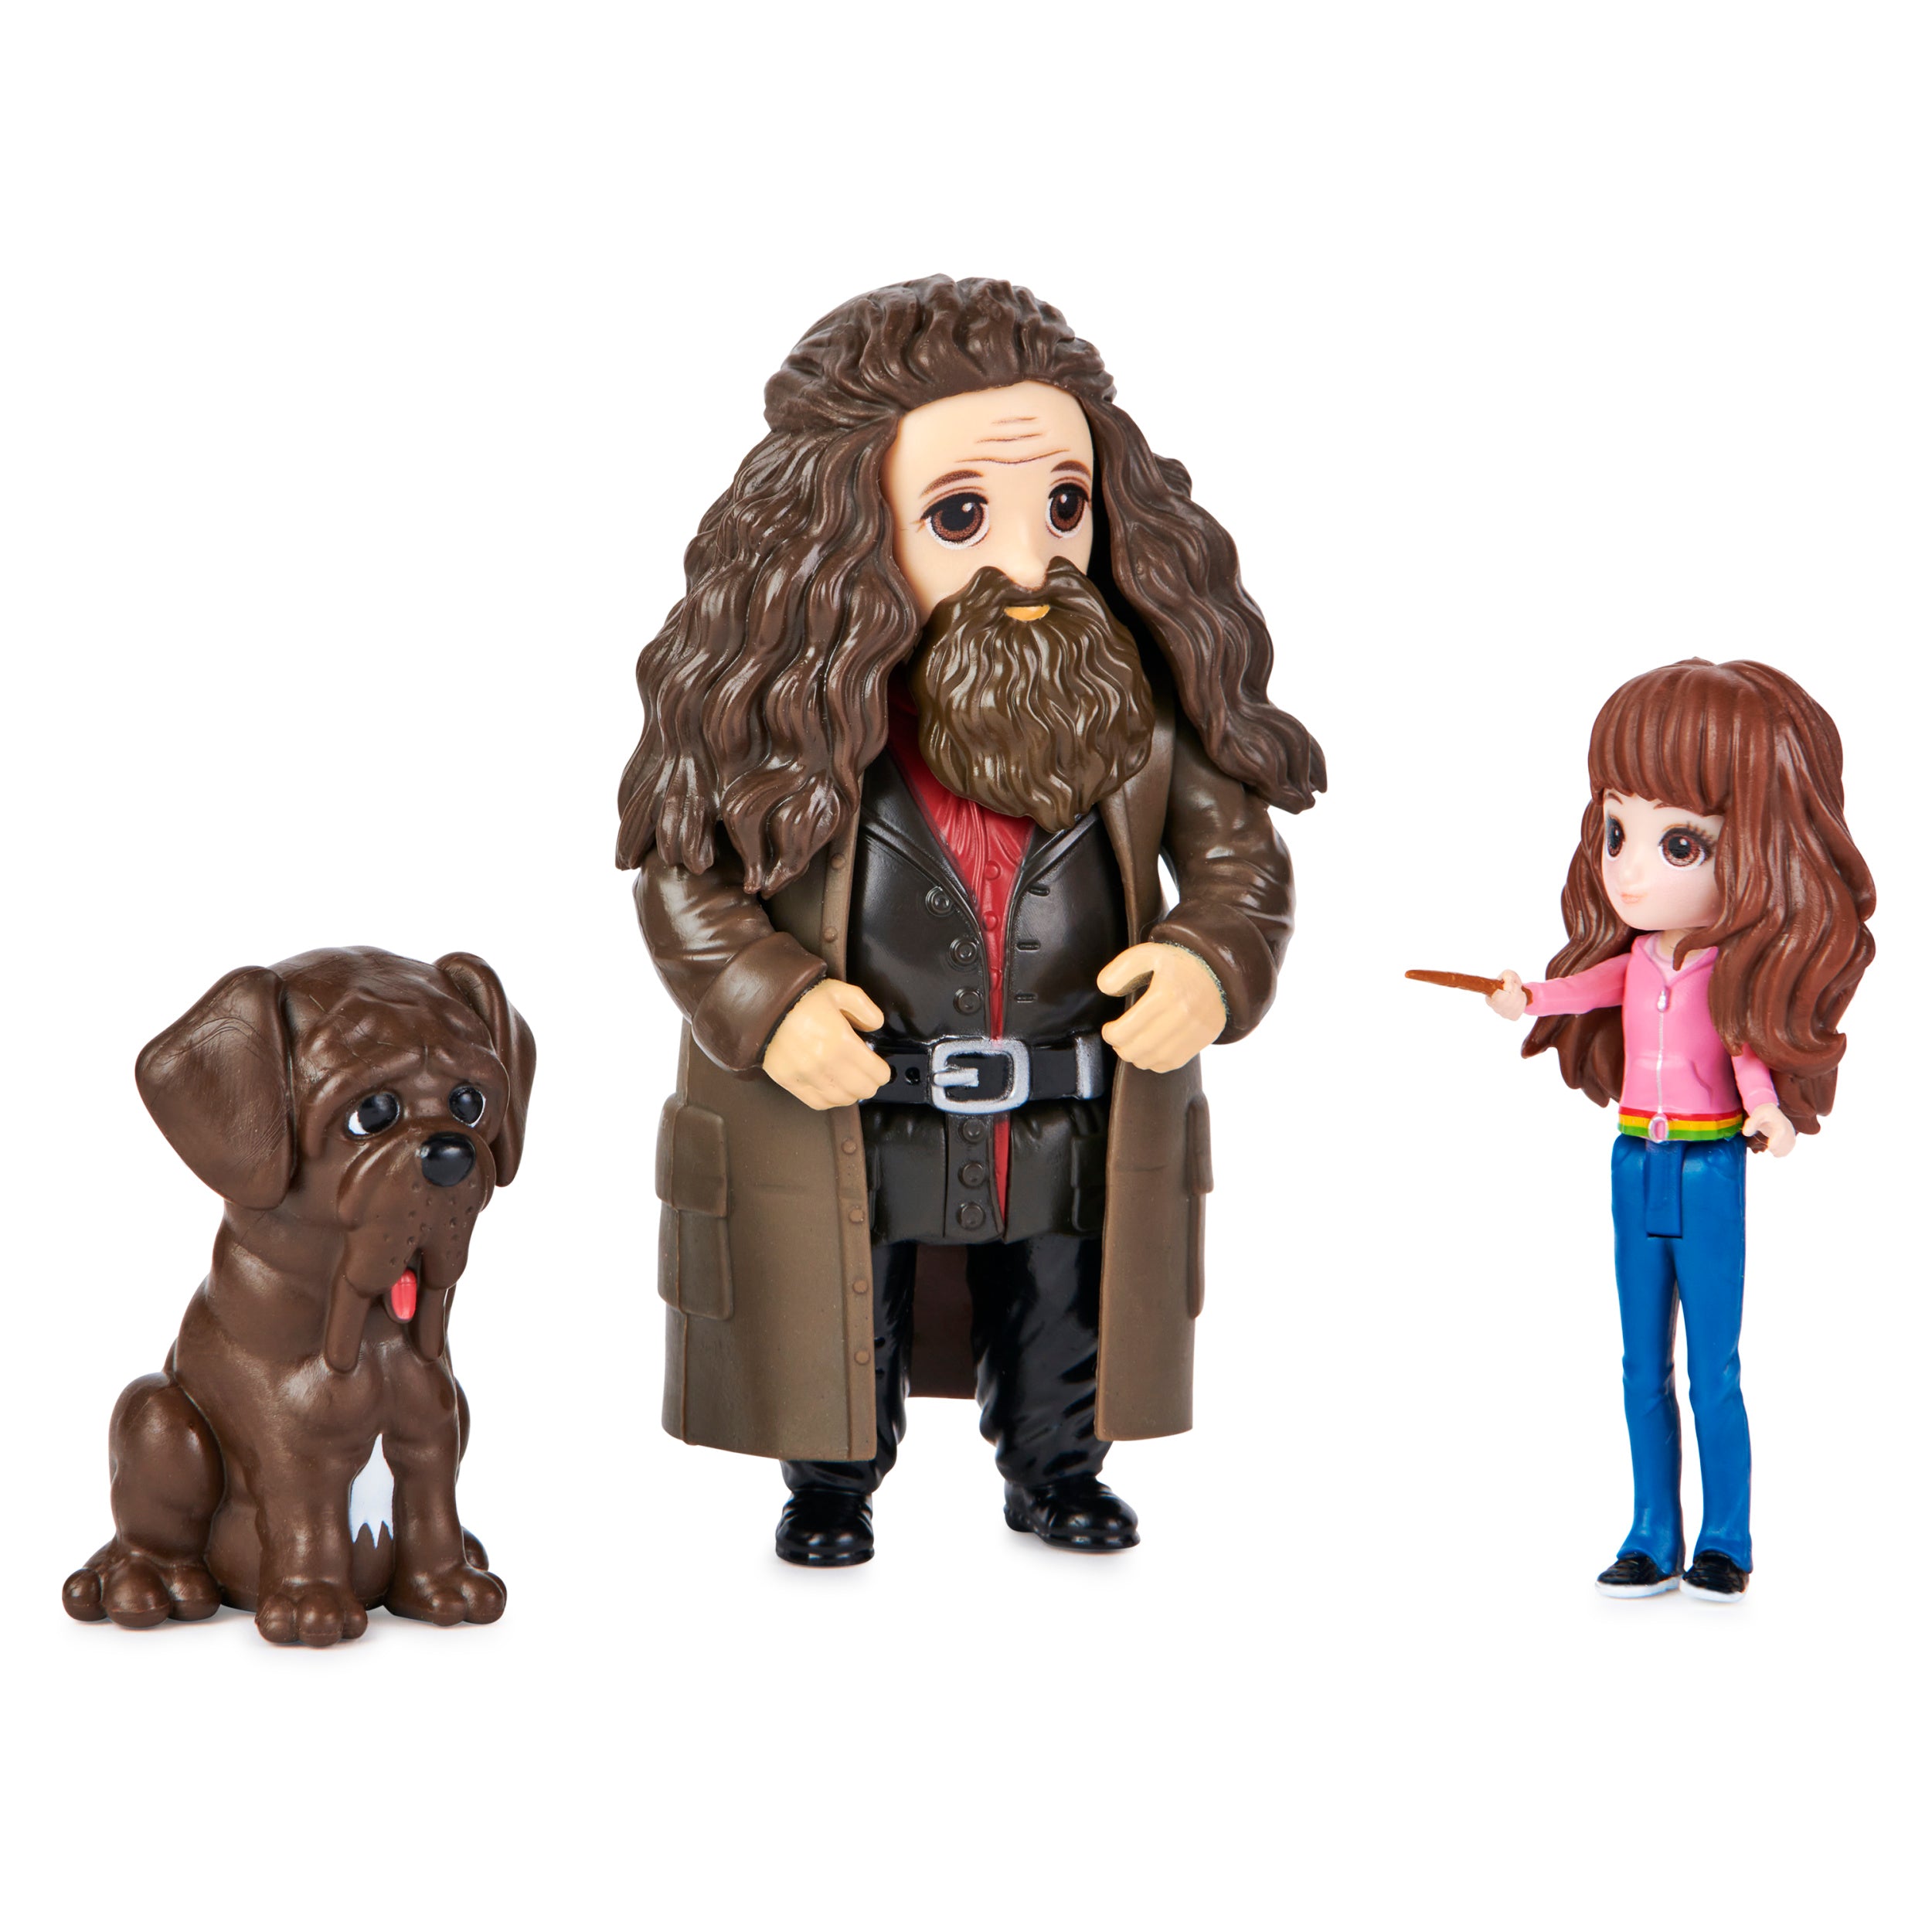 Wizarding World: Harry Potter Mini Pack Figuras Magicas - Hermione Y Hagrid